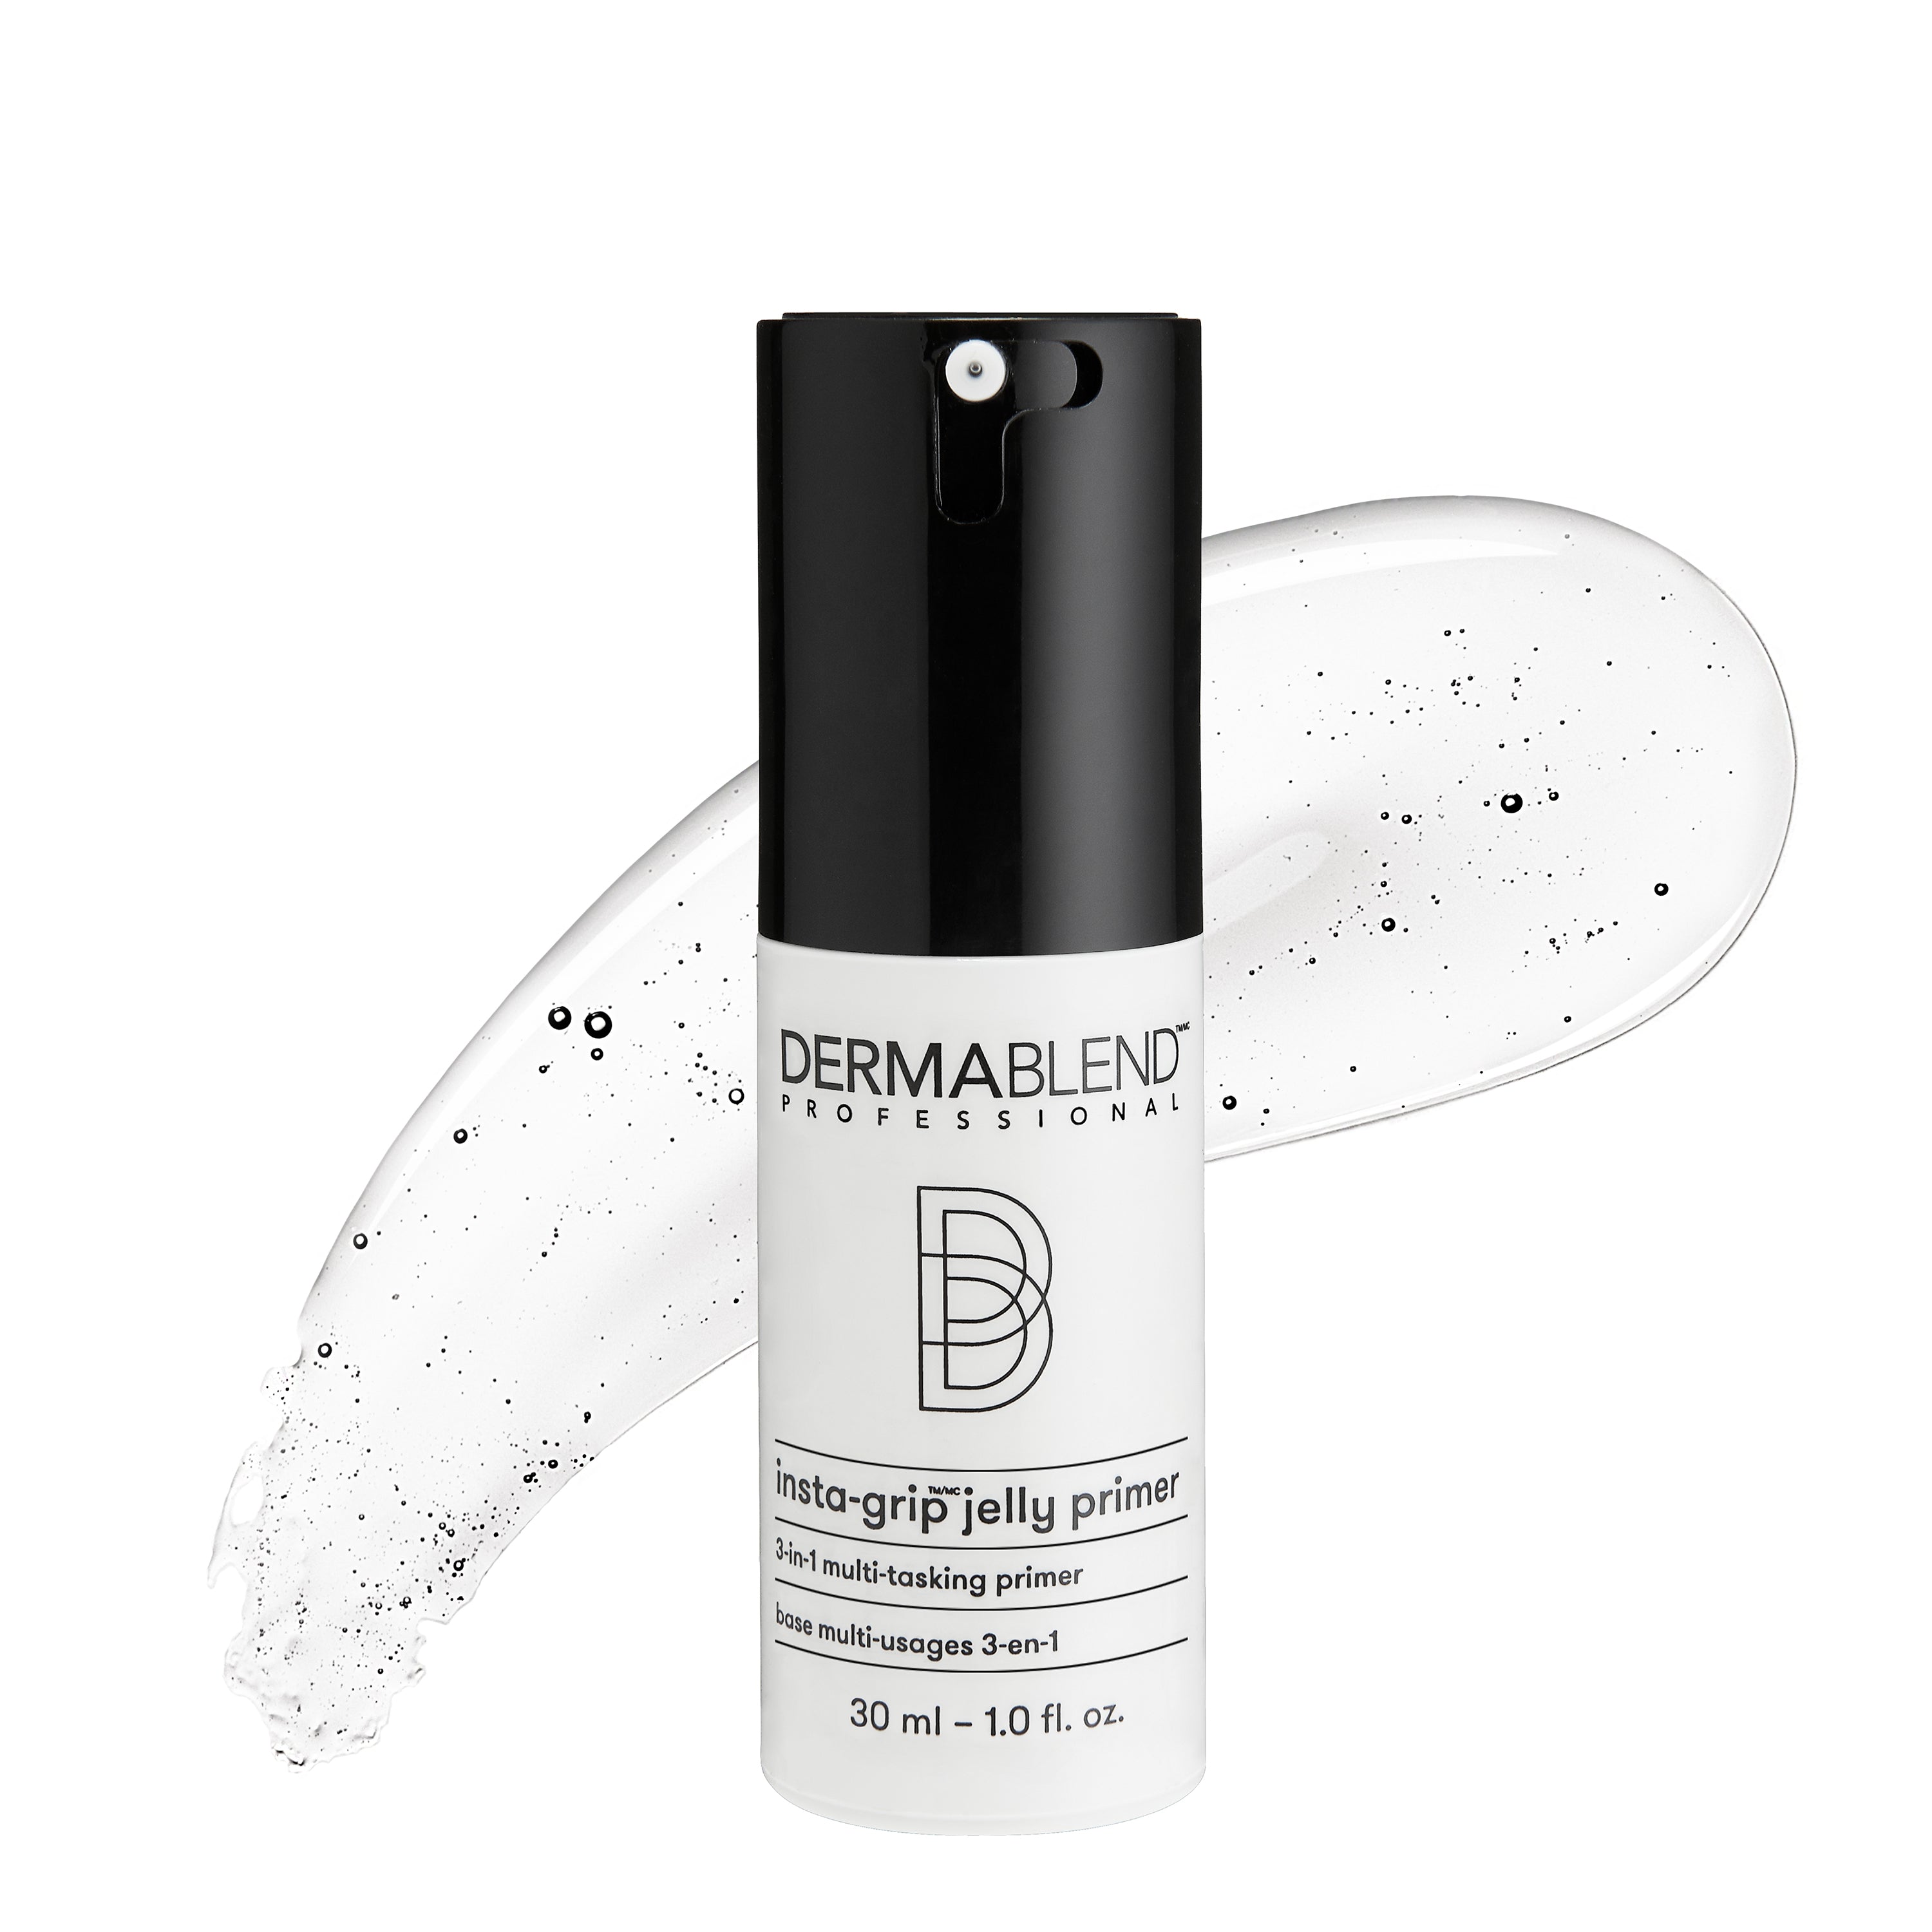 Dermablend Insta-Grip Jelly Face Primer ingredients (Explained)